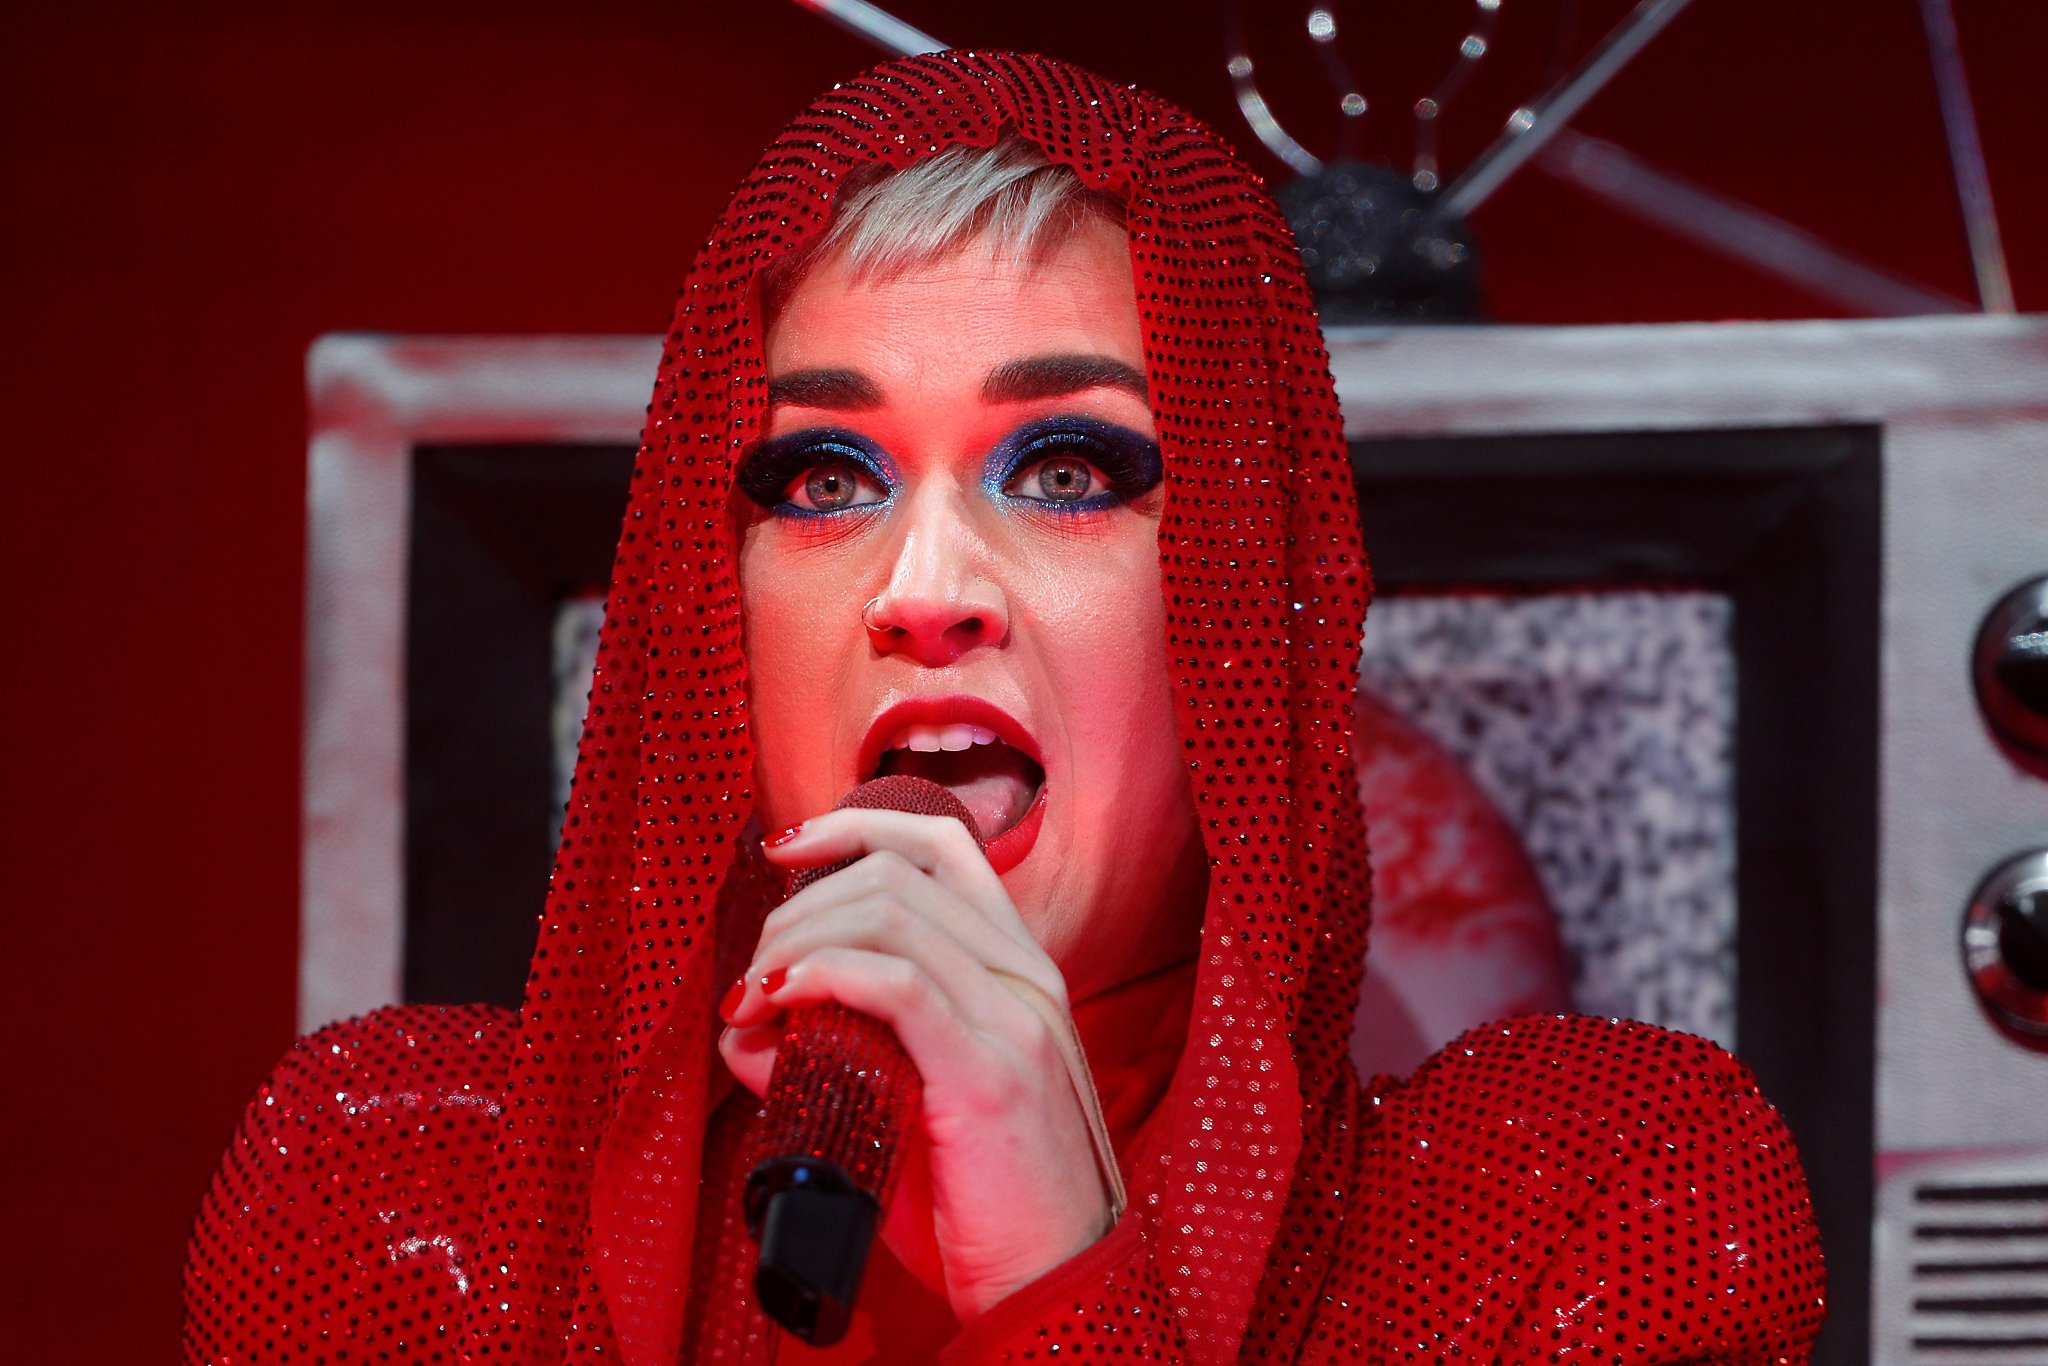 Katy Perry strains for pop relevance